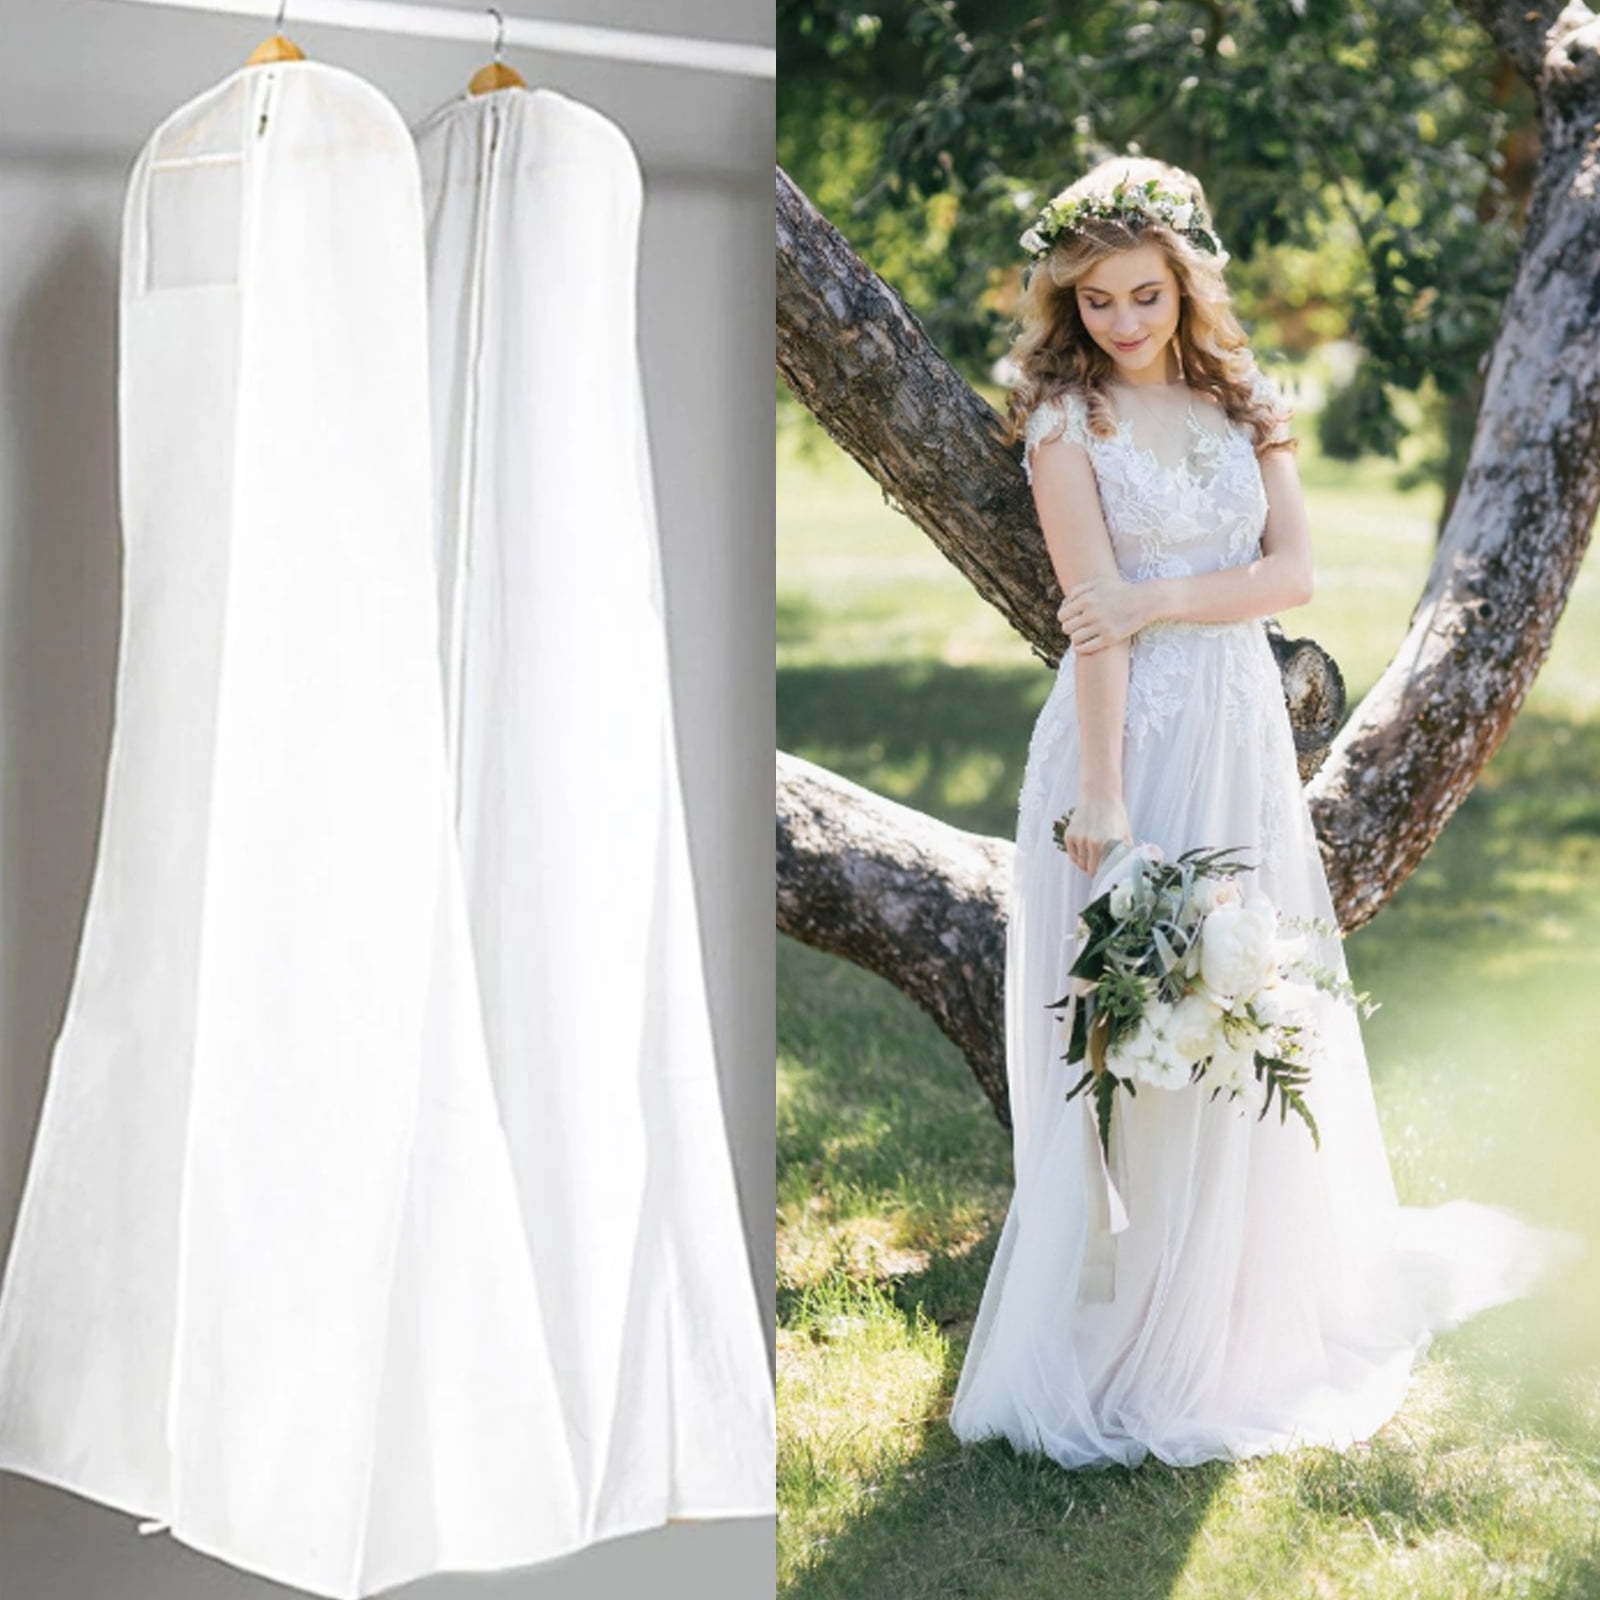 20x Hoesh Breathable Long Dress Zip Cover Bag For Bridal Wedding Gown Prom Dress 